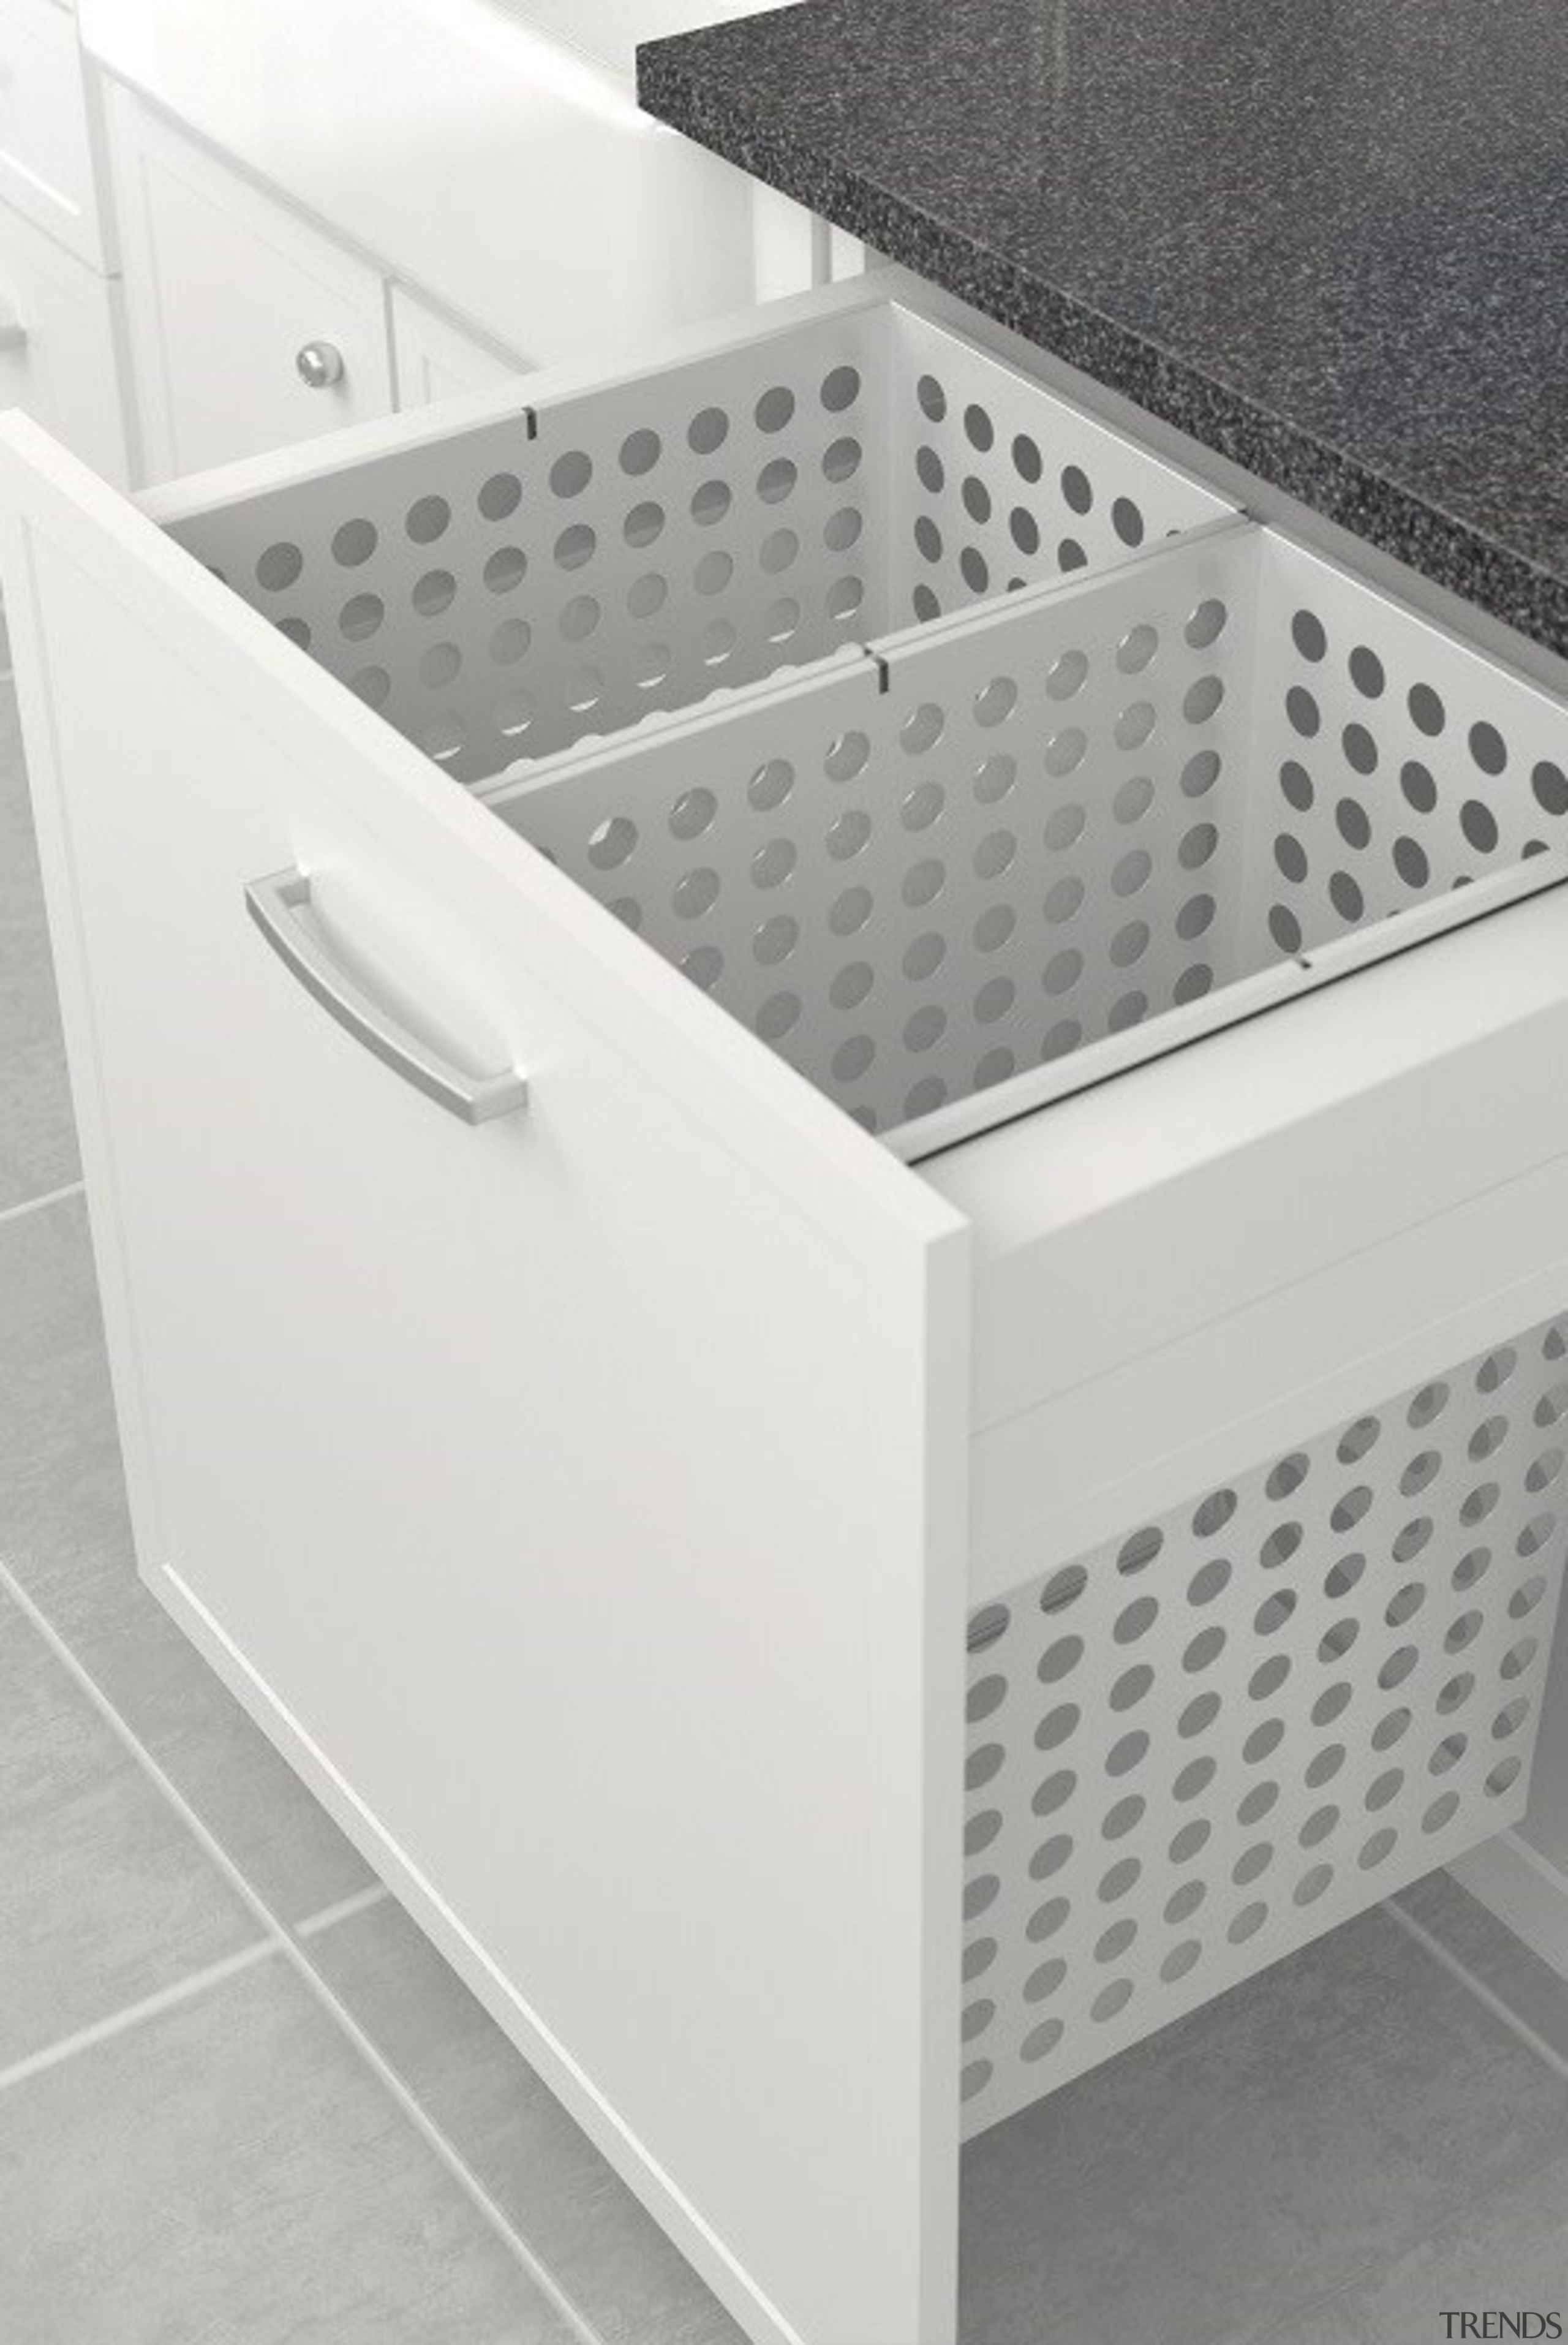 The Tanova Deluxe range offers pull out laundry angle, drawer, product, product design, white, gray